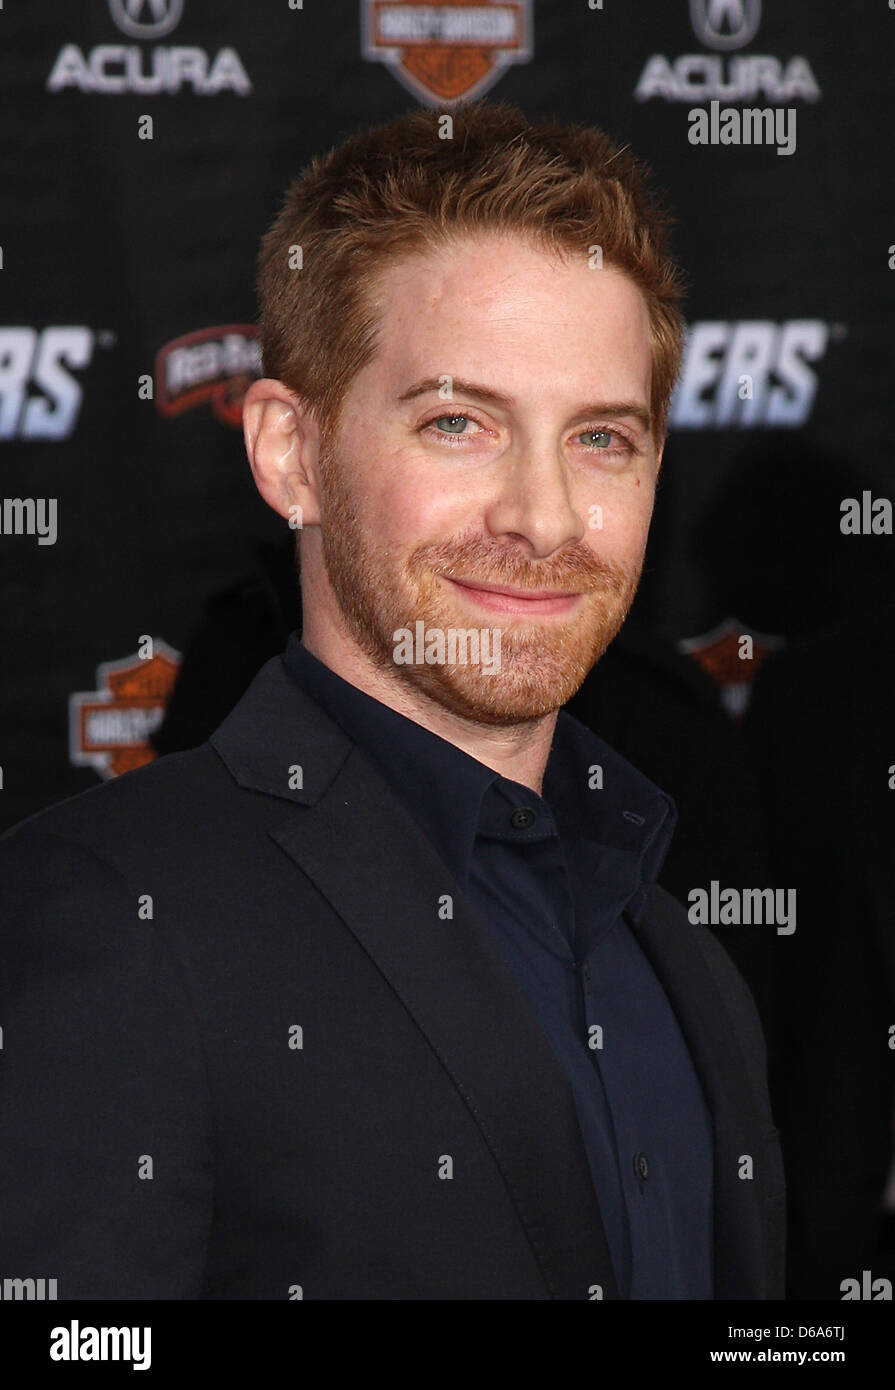 Seth Green World Premiere of "The Avengers" at the El Capitan  TheatreArrivals Hollywood, California Stock Photo - Alamy